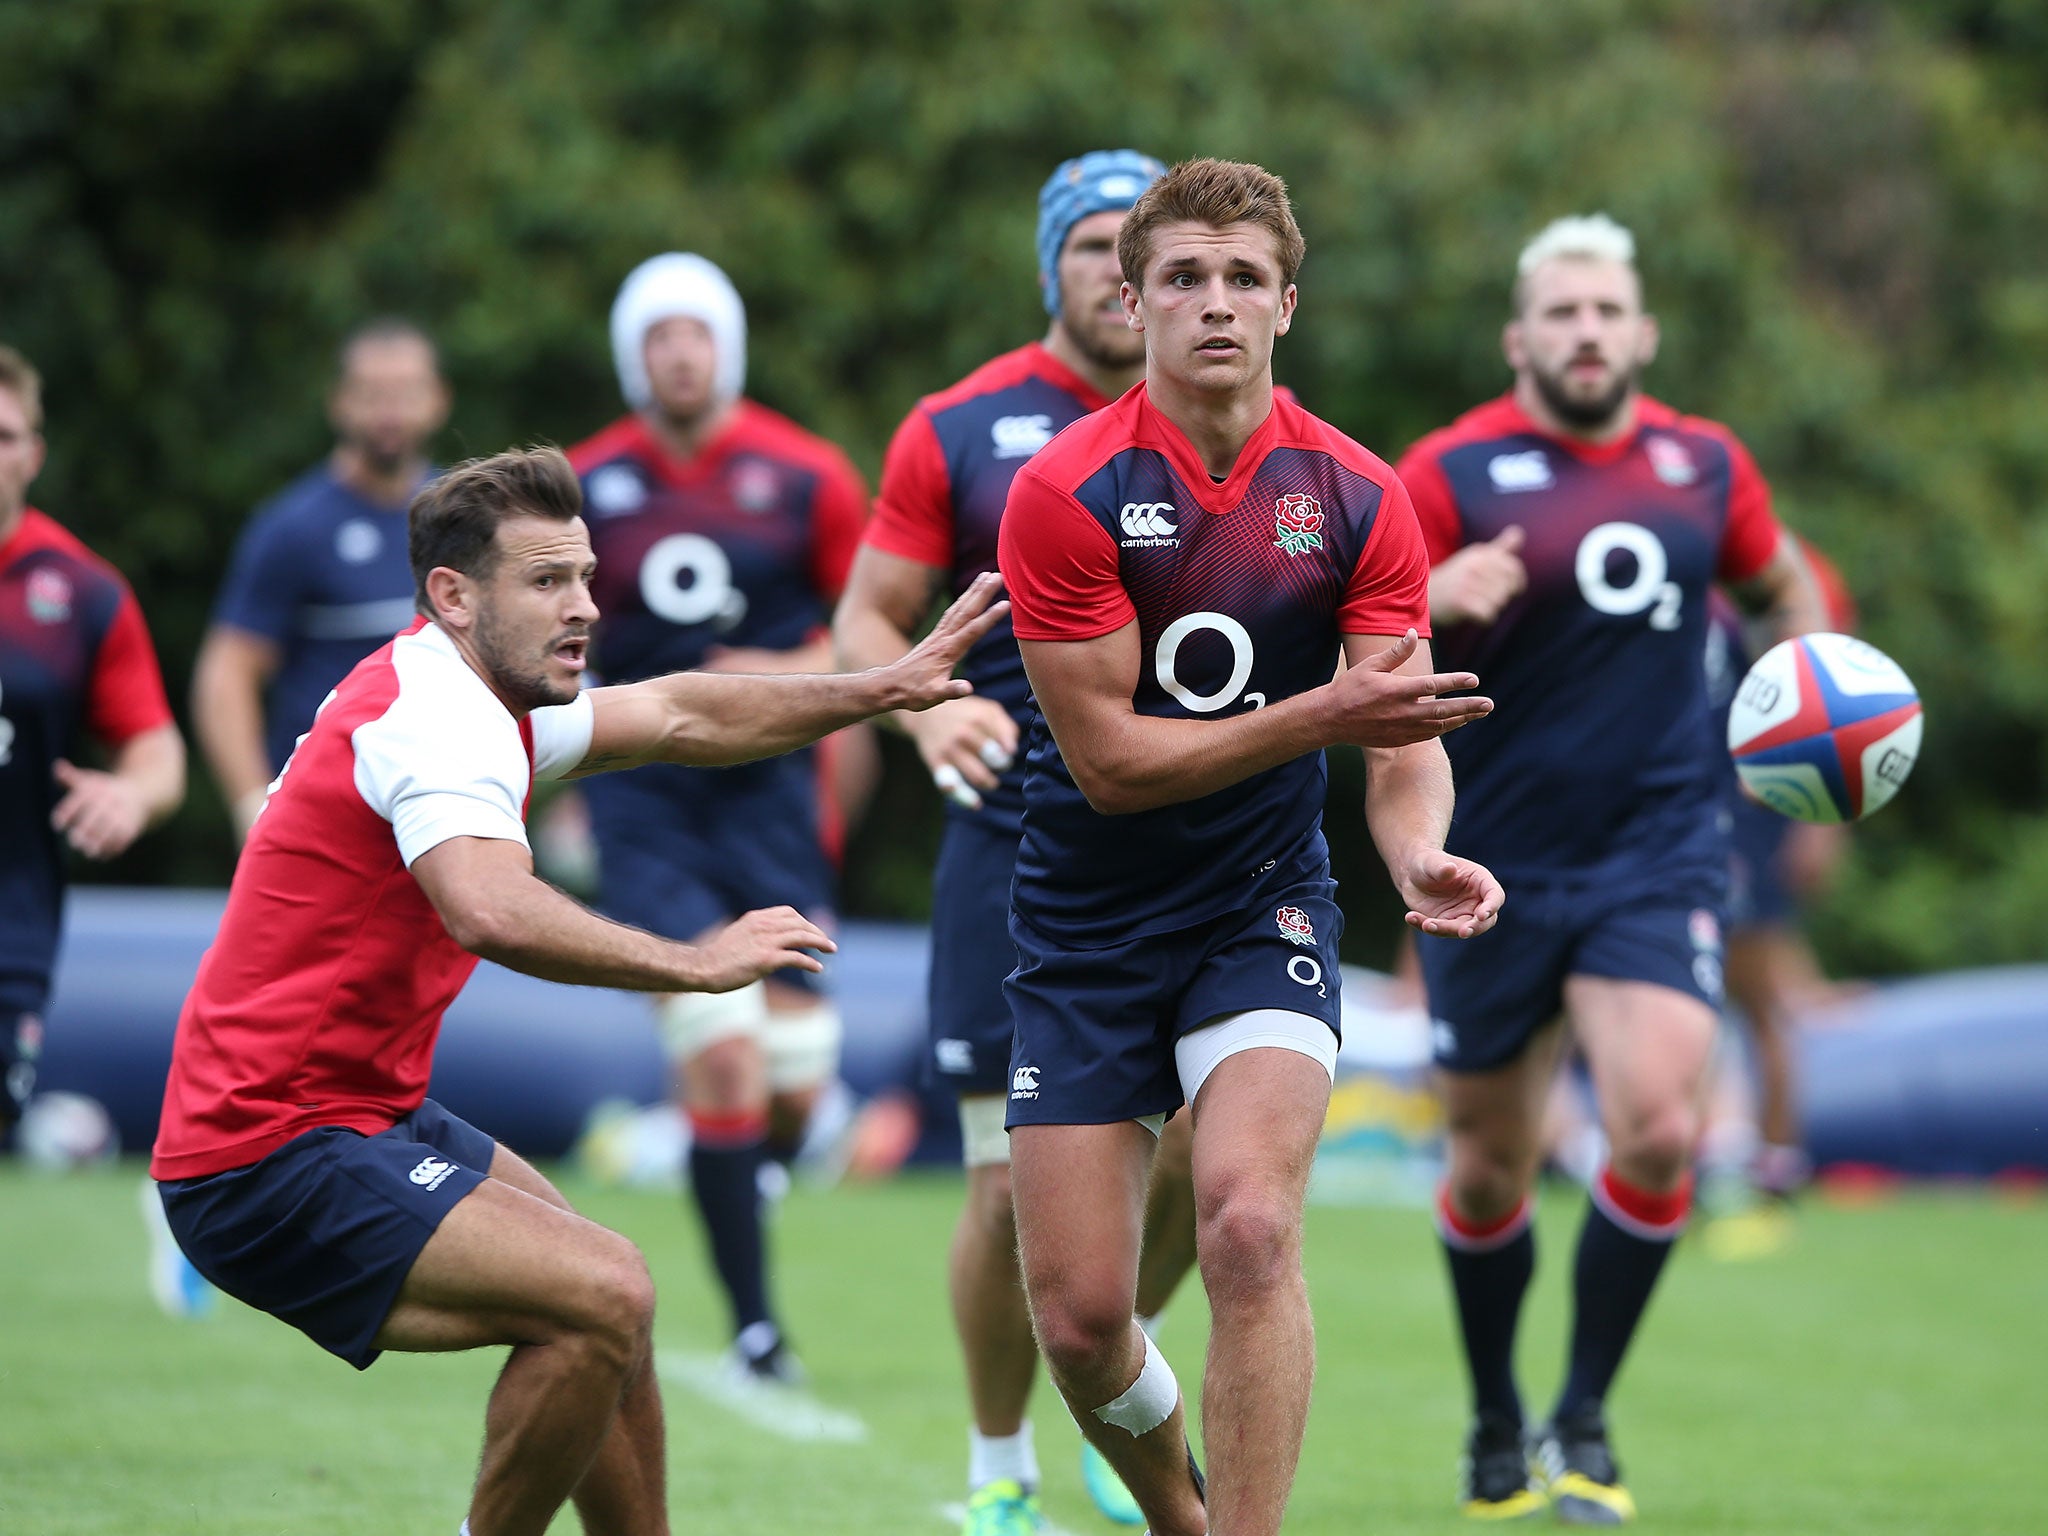 Uncapped Exeter back Henry Slade’s versatility could count in his favour with Stuart Lancaster